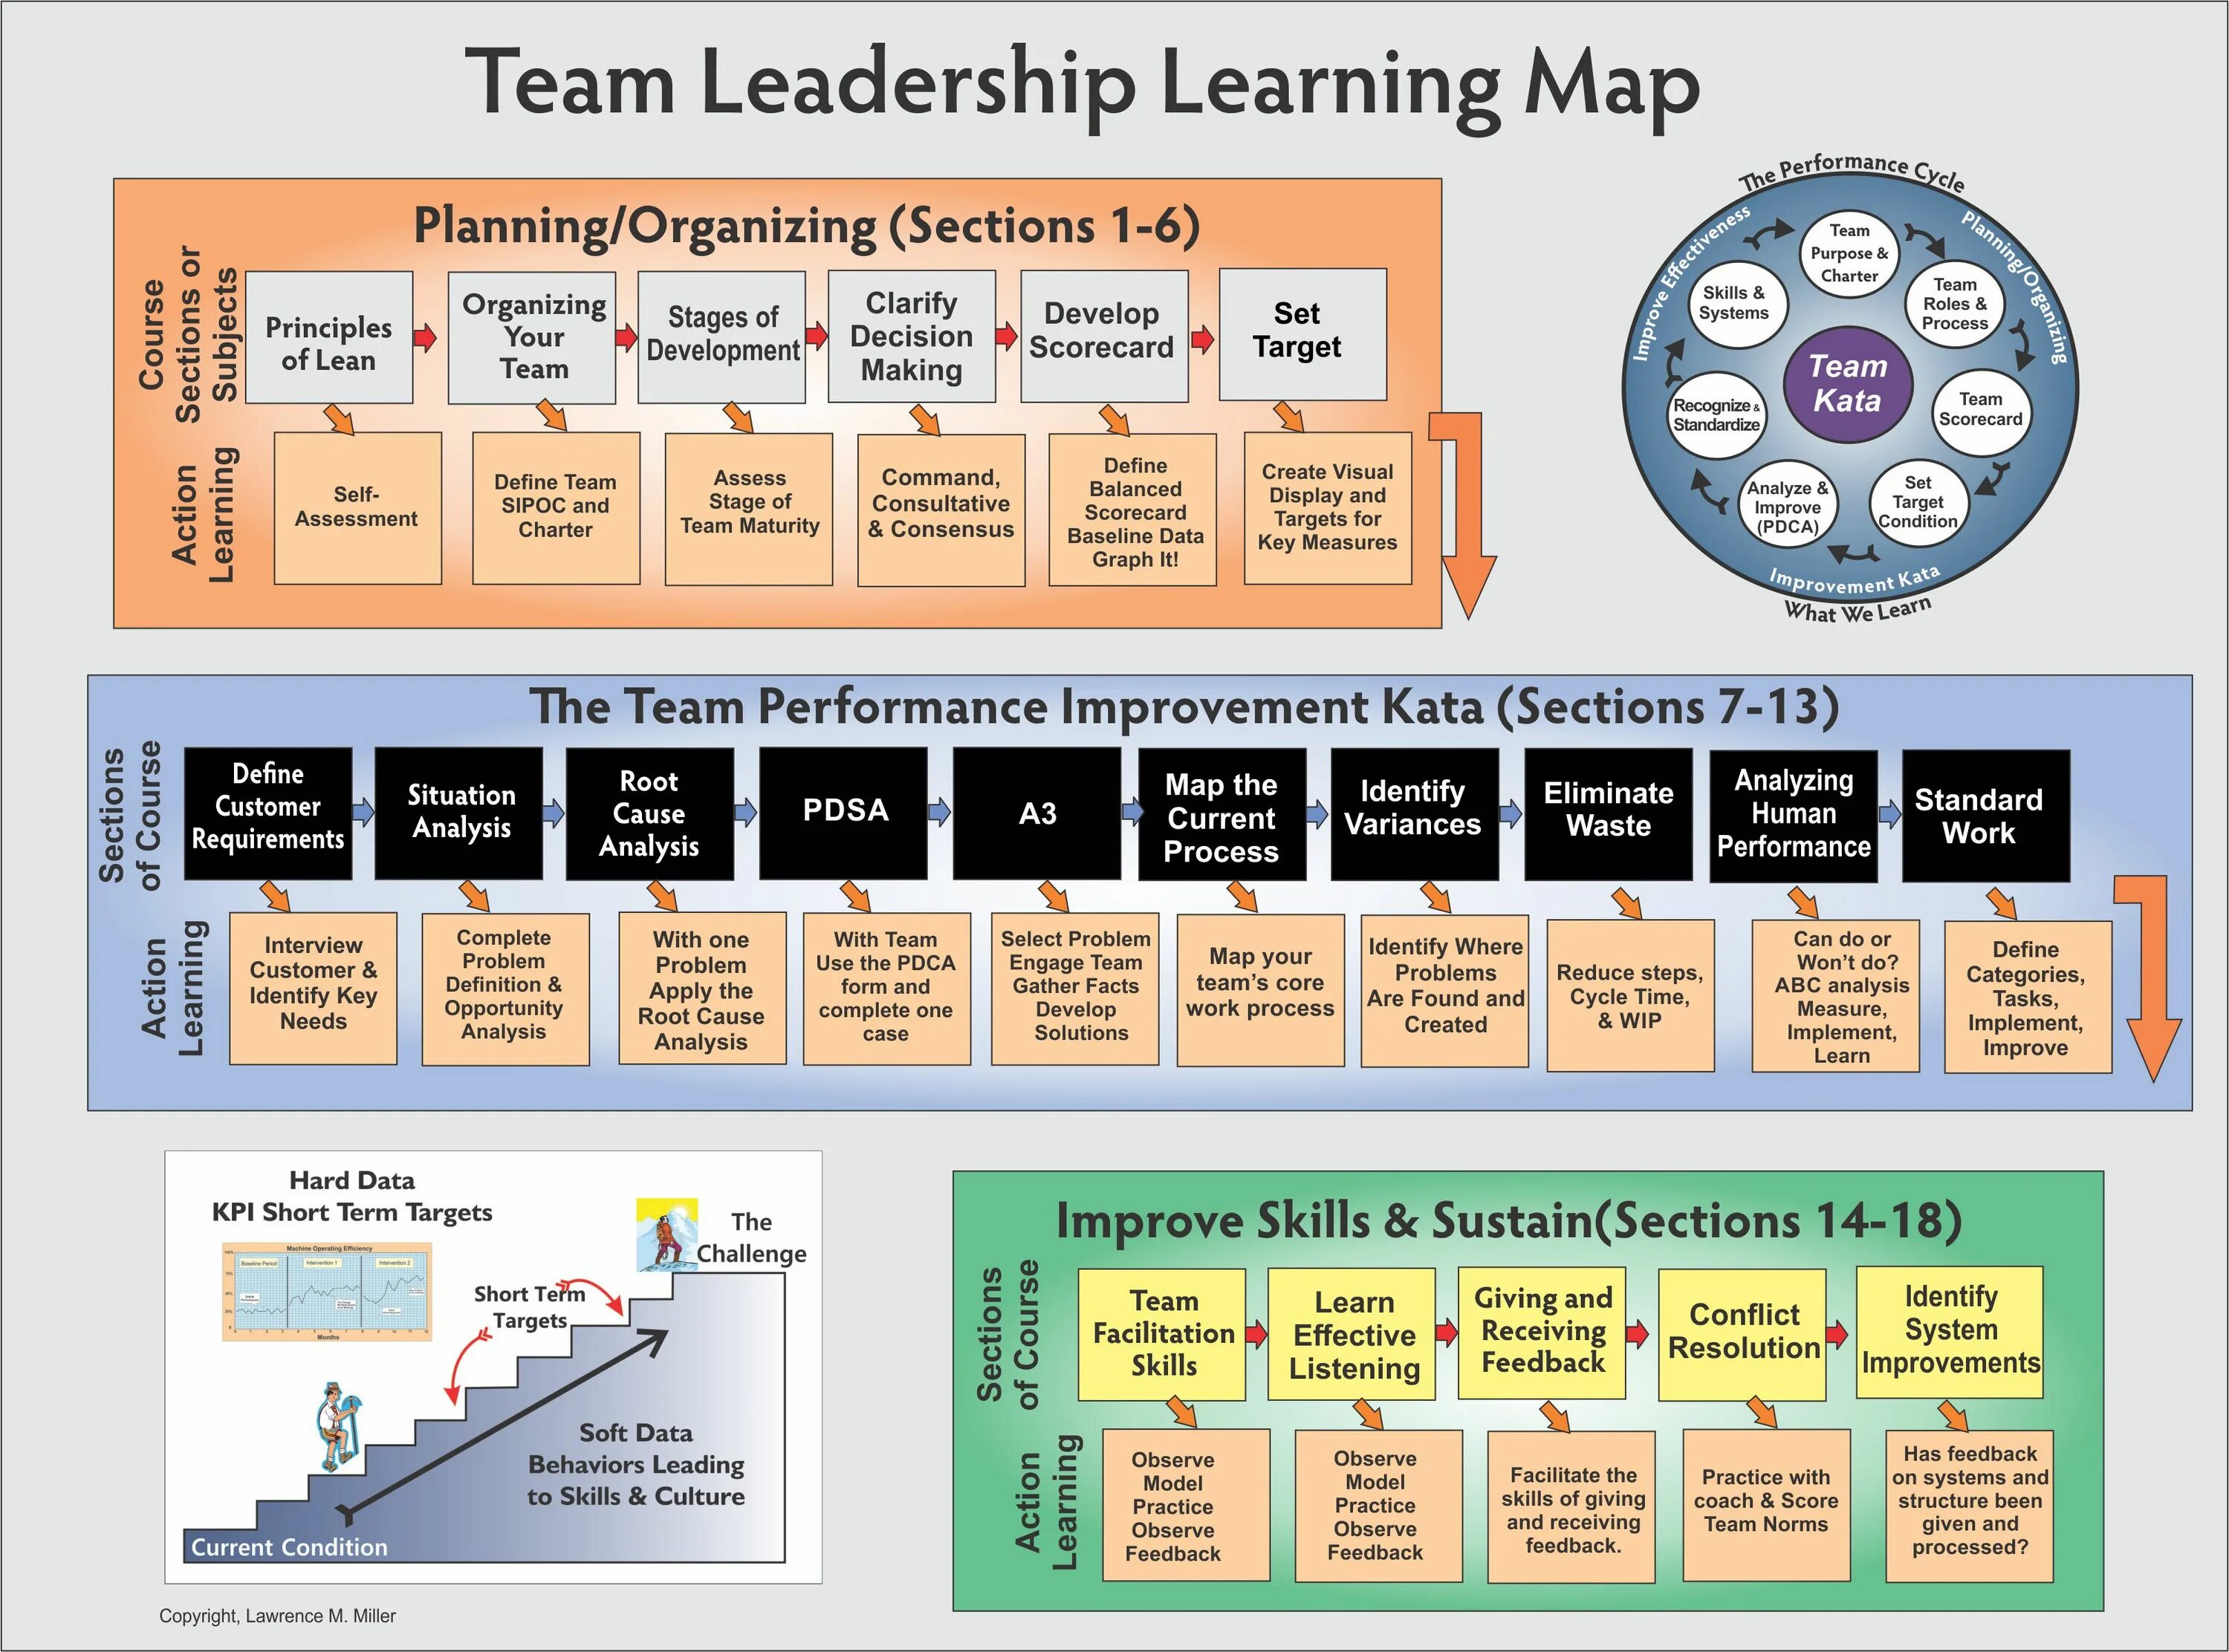 Learning maps. Lean Team. Skills Systems. Development Scorecard. Performance measurement of Teams with the Scorecard.